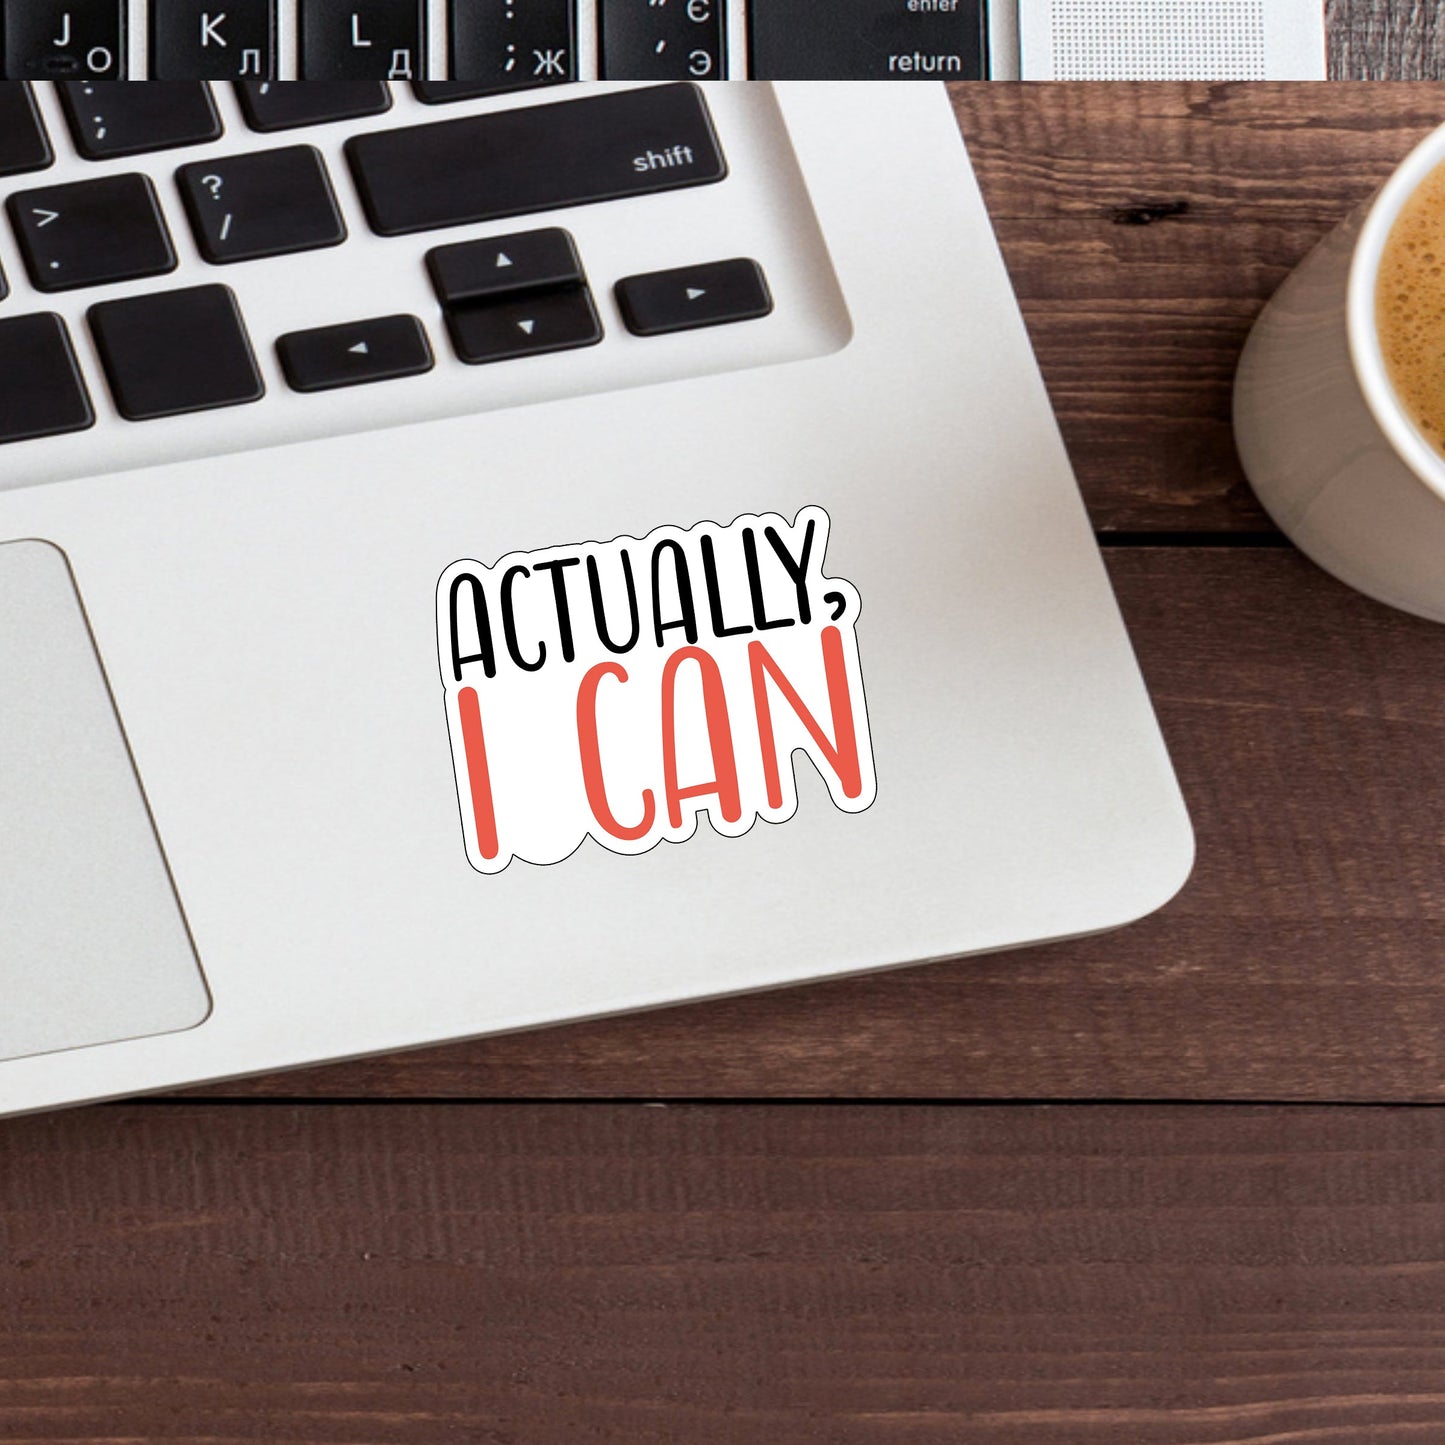 Actually-I-can-sticker